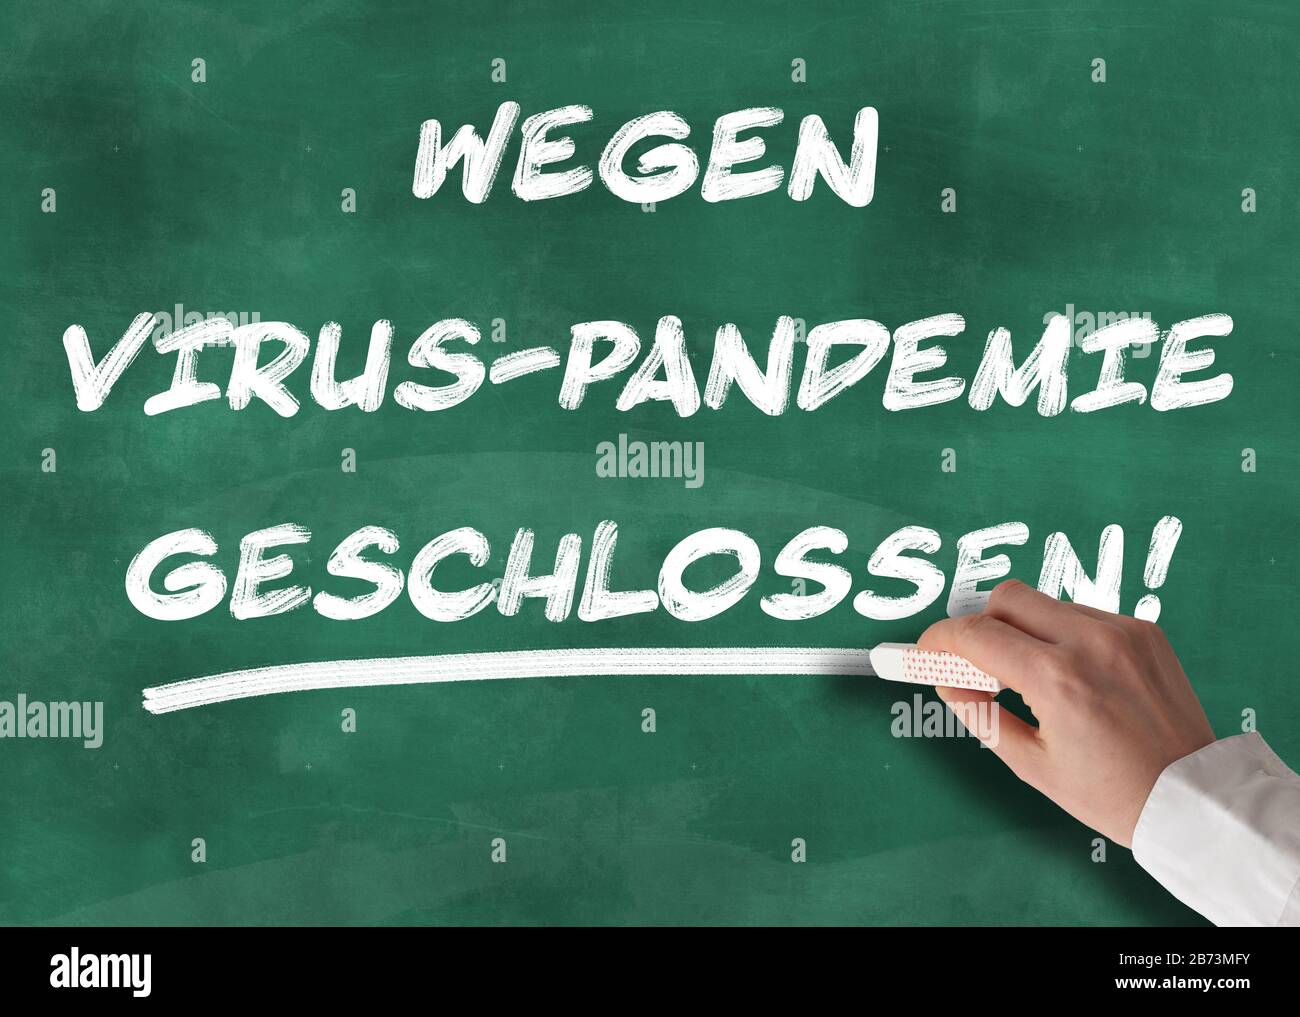 text WEGEN VIRUS-PANDEMIE GESCHLOSSEN on chalkboard, German for closed due to virus pandemic, schools and business closed during corona outbreak Stock Photo